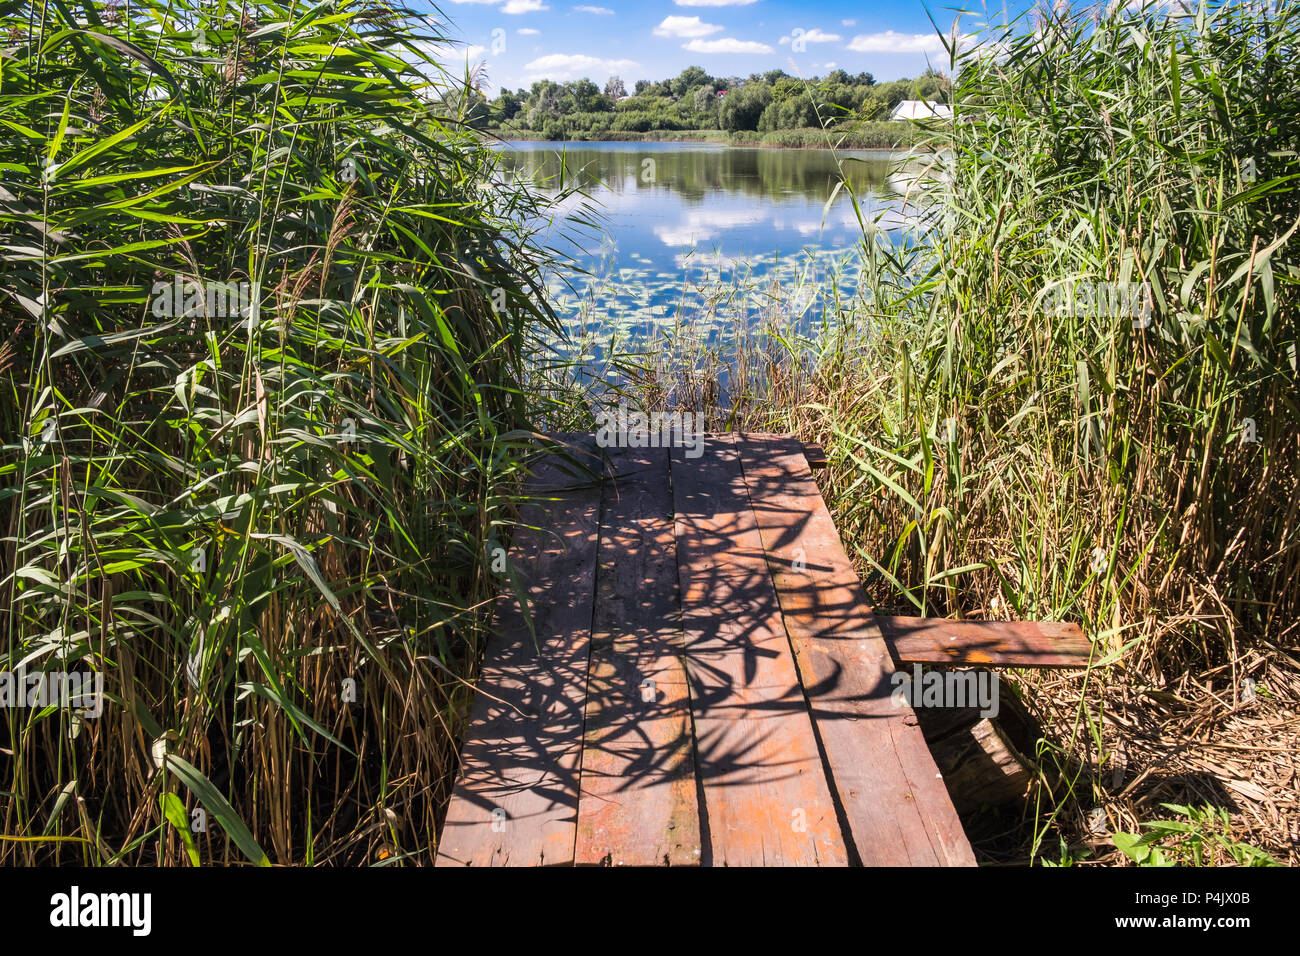 Old wooden bridge over the rural lake. Wild reeds on the lake edge. Small country houses among trees on distant side. Sunny summer day. Stock Photo